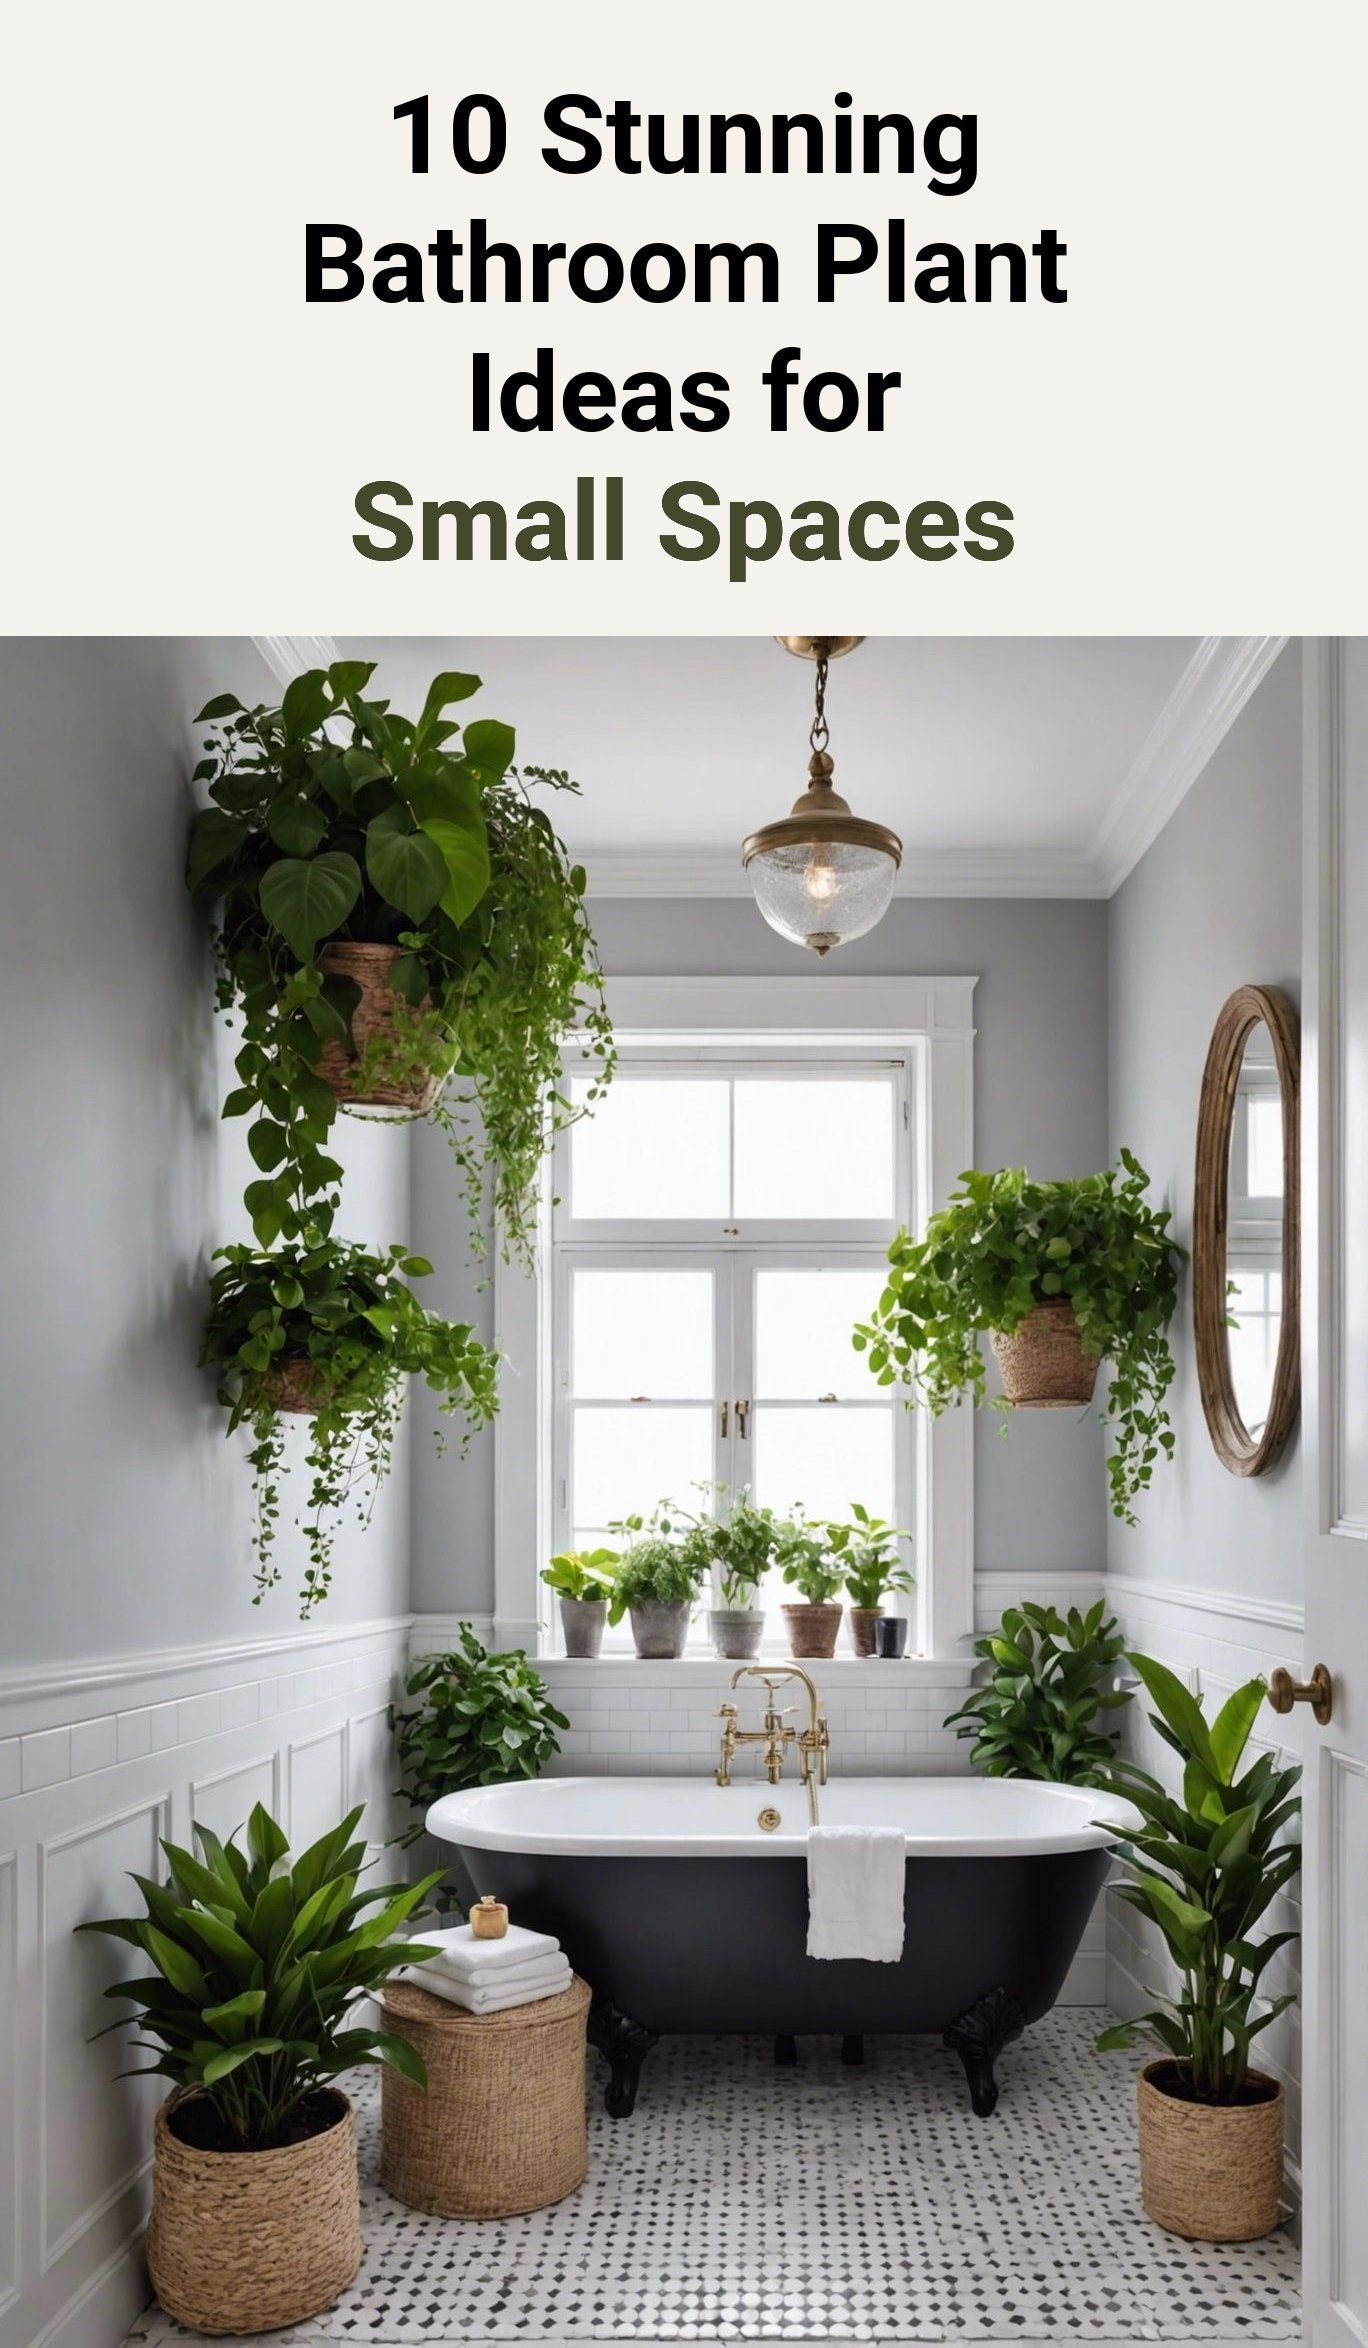 10 Stunning Bathroom Plant Ideas for Small Spaces